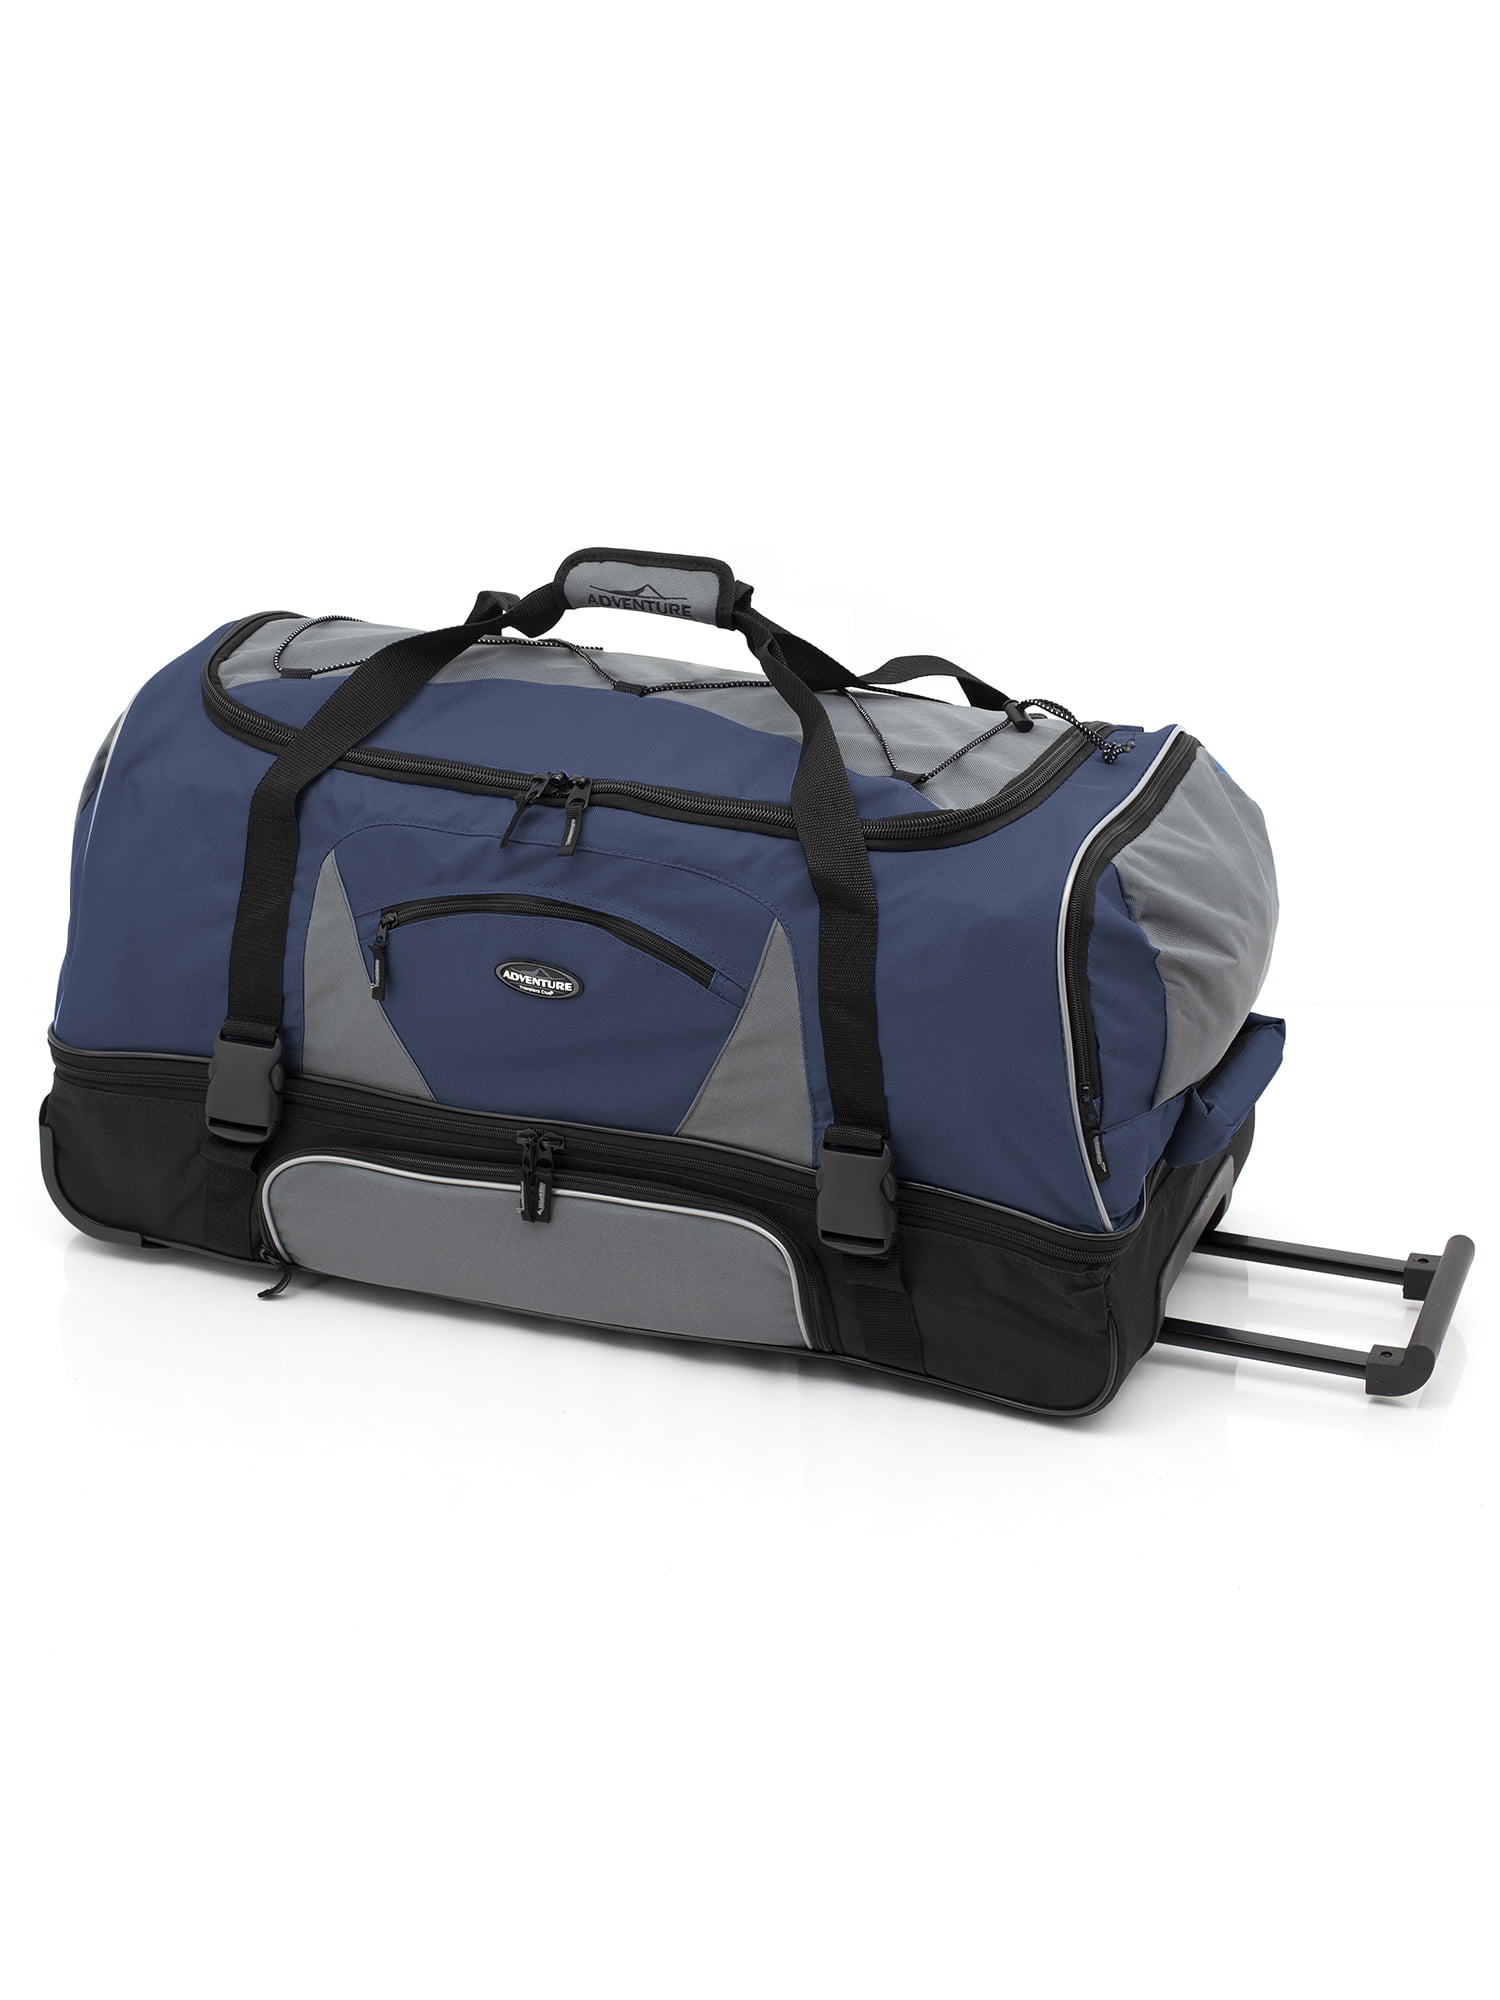 Trolley Duffle Bag for Travel